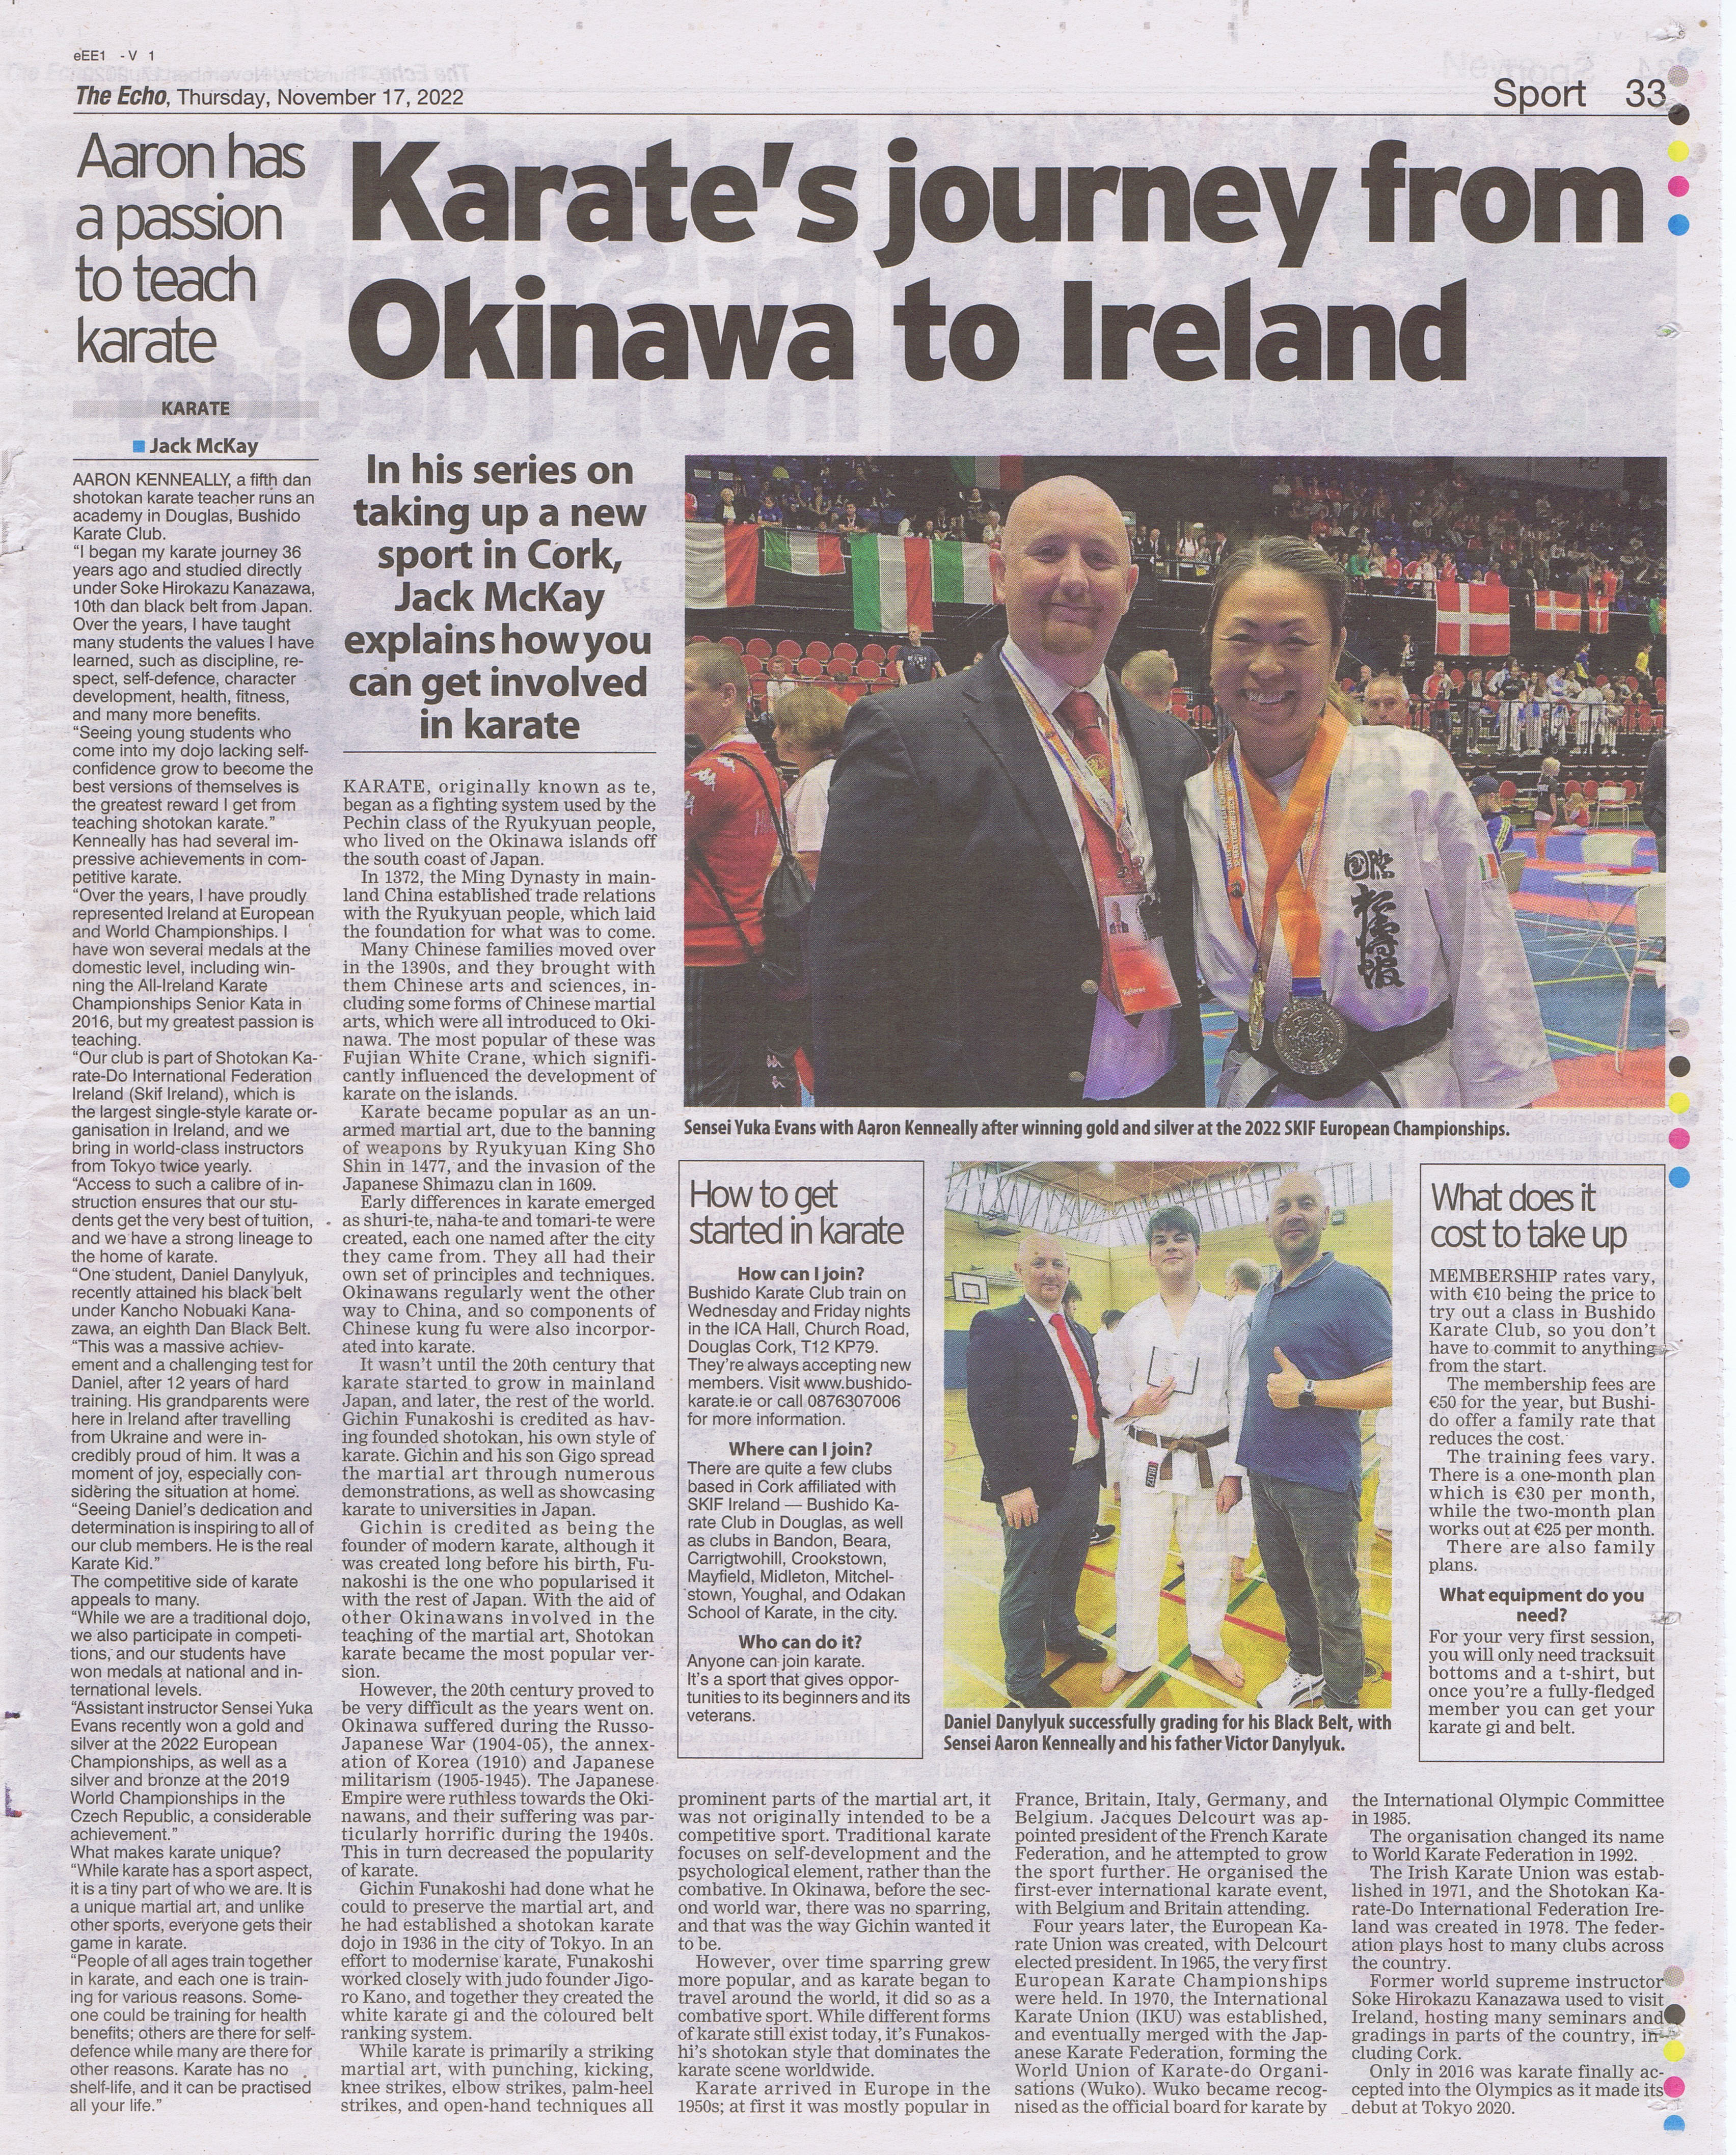 Full-page article published in the Evening Echo on November 17, 2022, about the Bushido Karate Club, including the achievements of Daniel Danylyuk on receiving his Black Belt and Sensei Yuka Evans winning a Gold and Silver at the 15th SKIEF European Championships. 